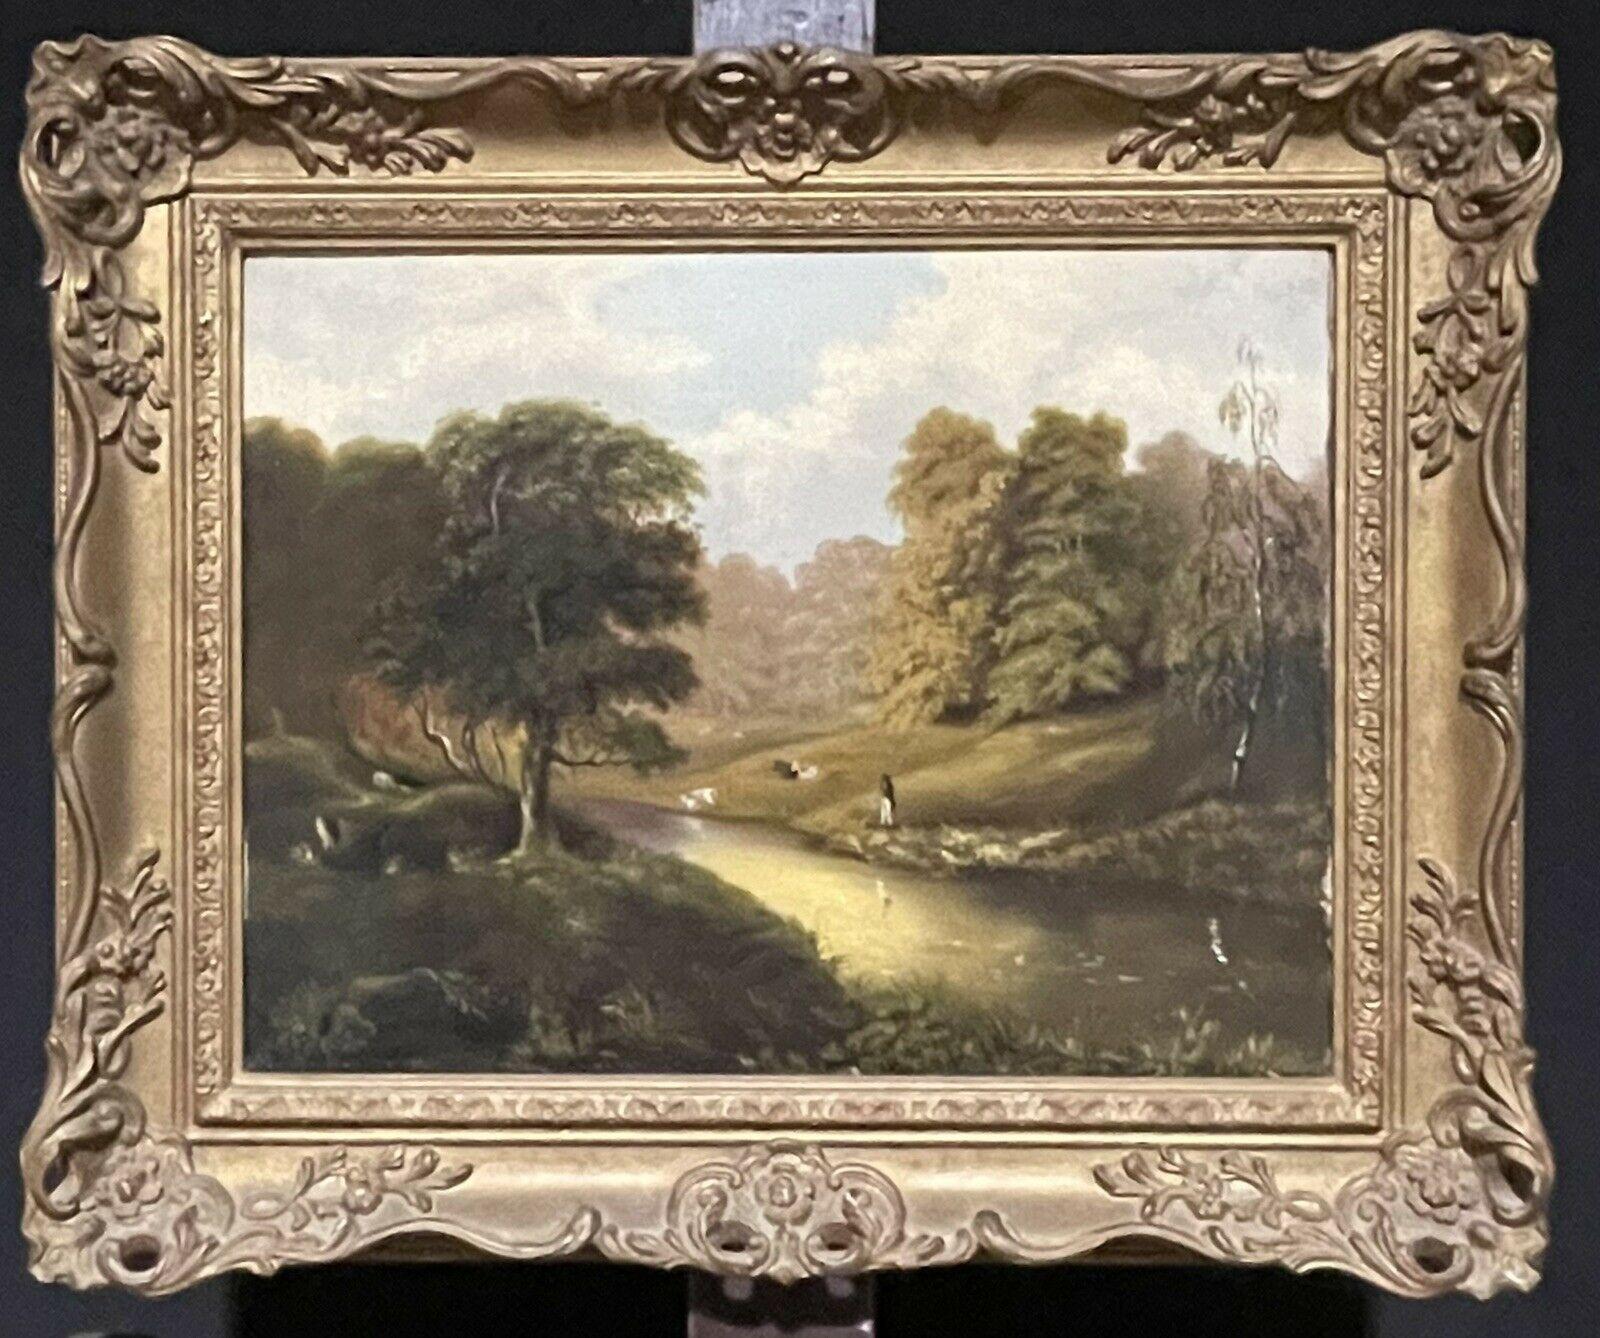 FINE 1850'S ENGLISH OIL - GENTLEMAN ANGLER ON RIVER BANK PASTORAL LANDSCAPE - Painting by Unknown